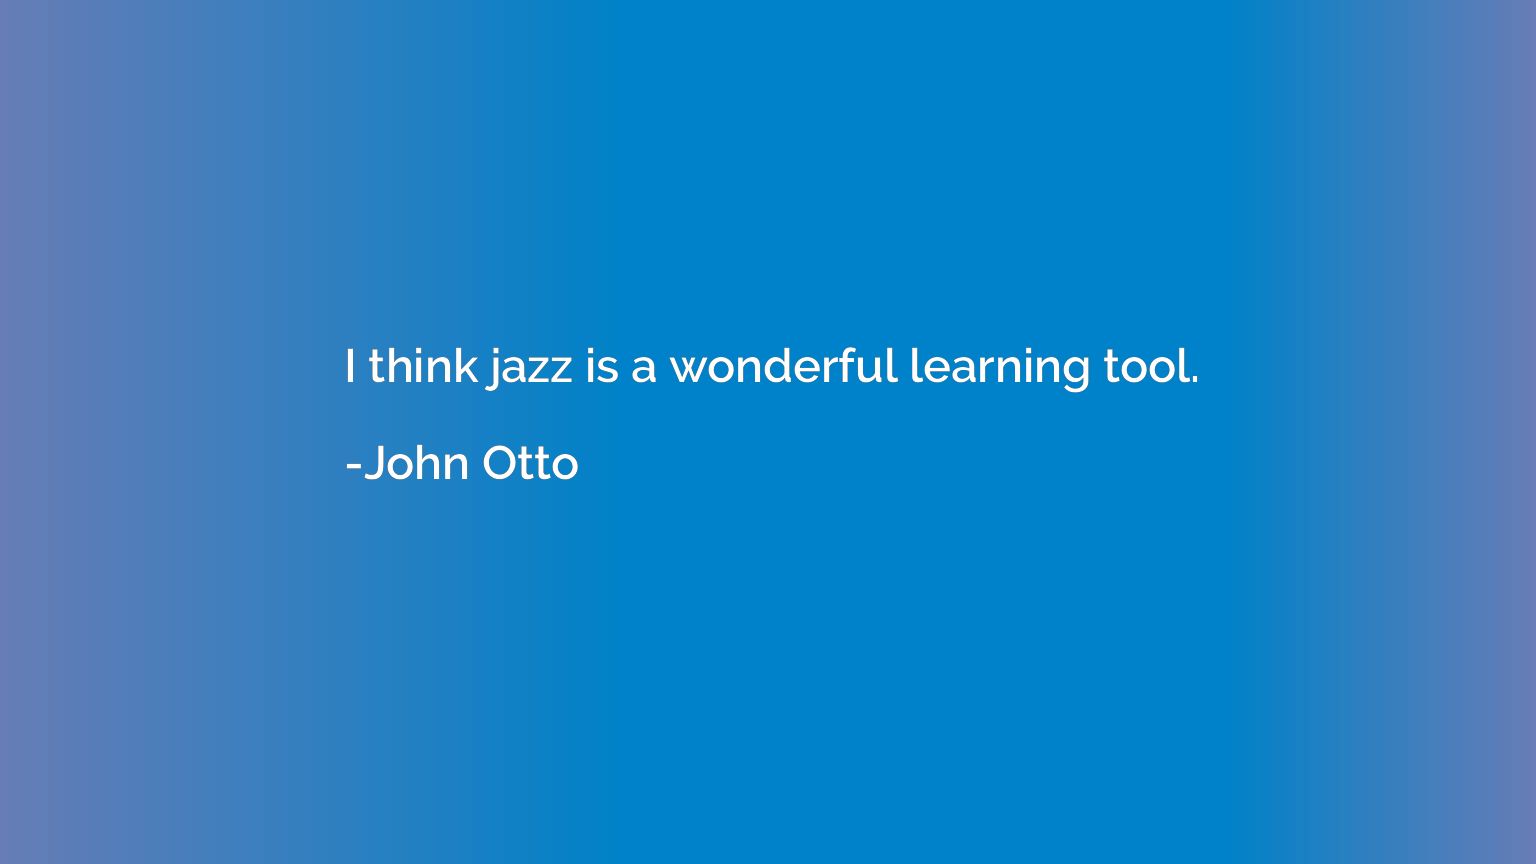 I think jazz is a wonderful learning tool.